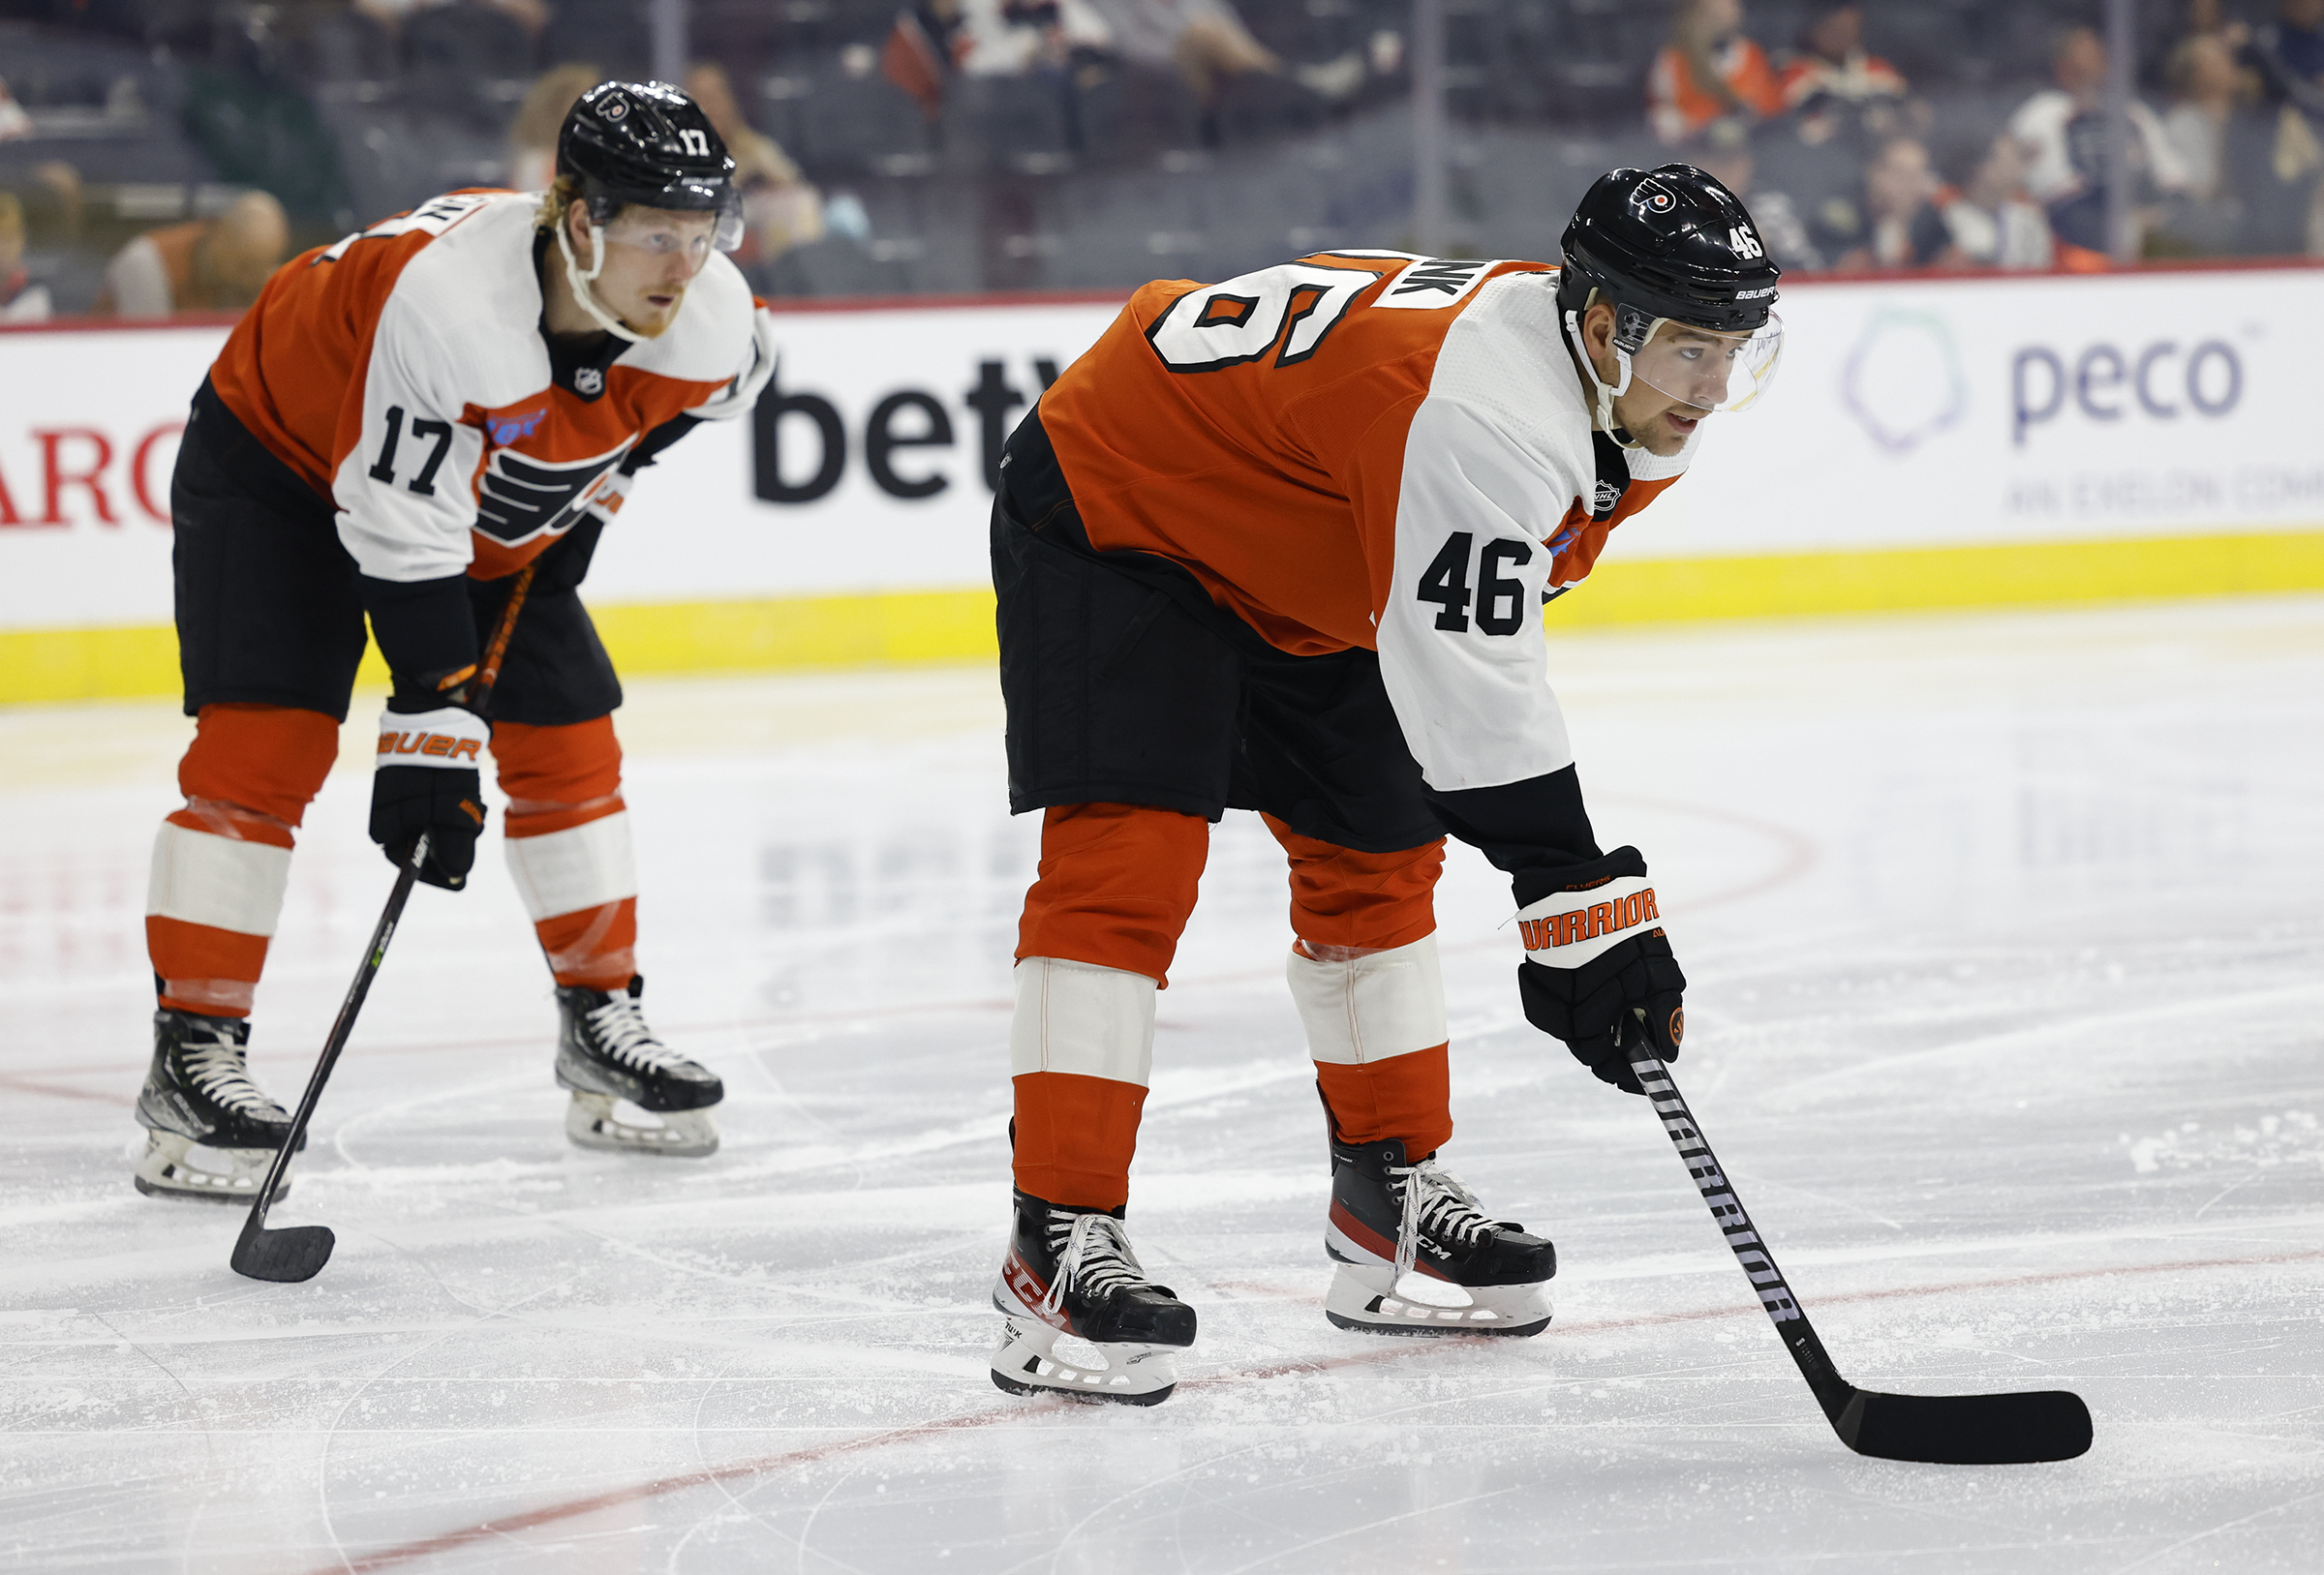 Flyers] Change of plans. Tyson Foerster will be wearing No. 71 this season.  Newly acquired defenseman Marc Staal will wear No. 18. : r/Flyers